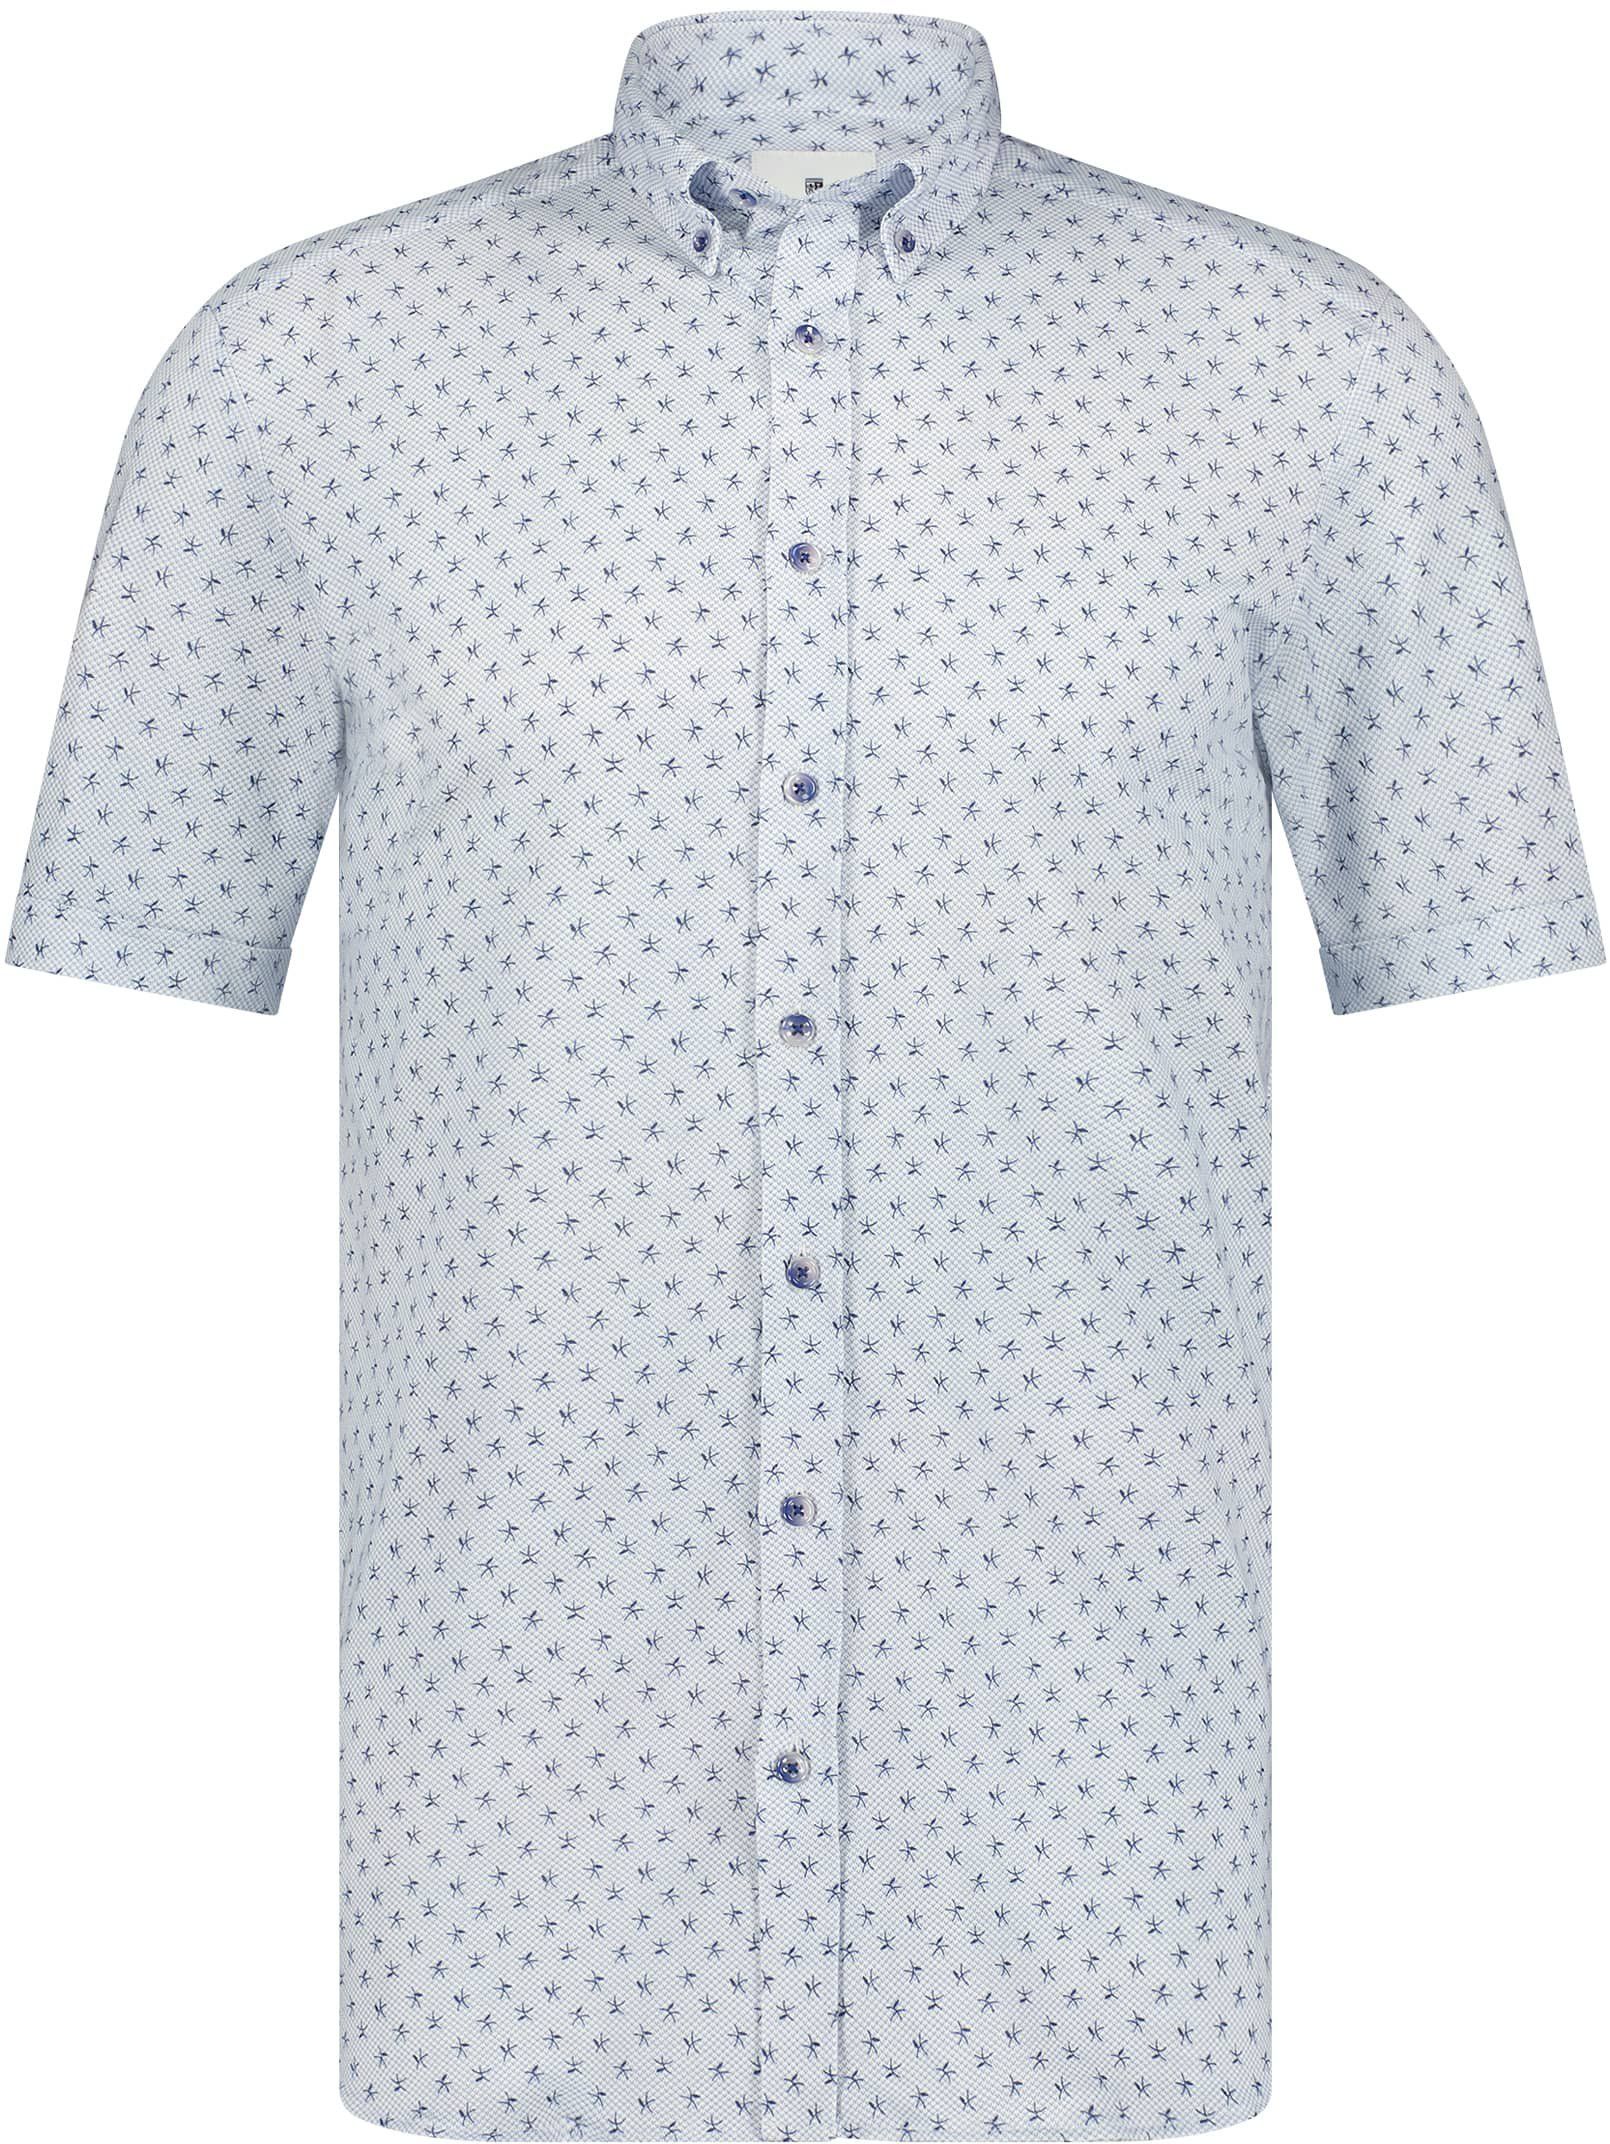 State Of Art Chemise Impression Manches Courtes Bleu taille L